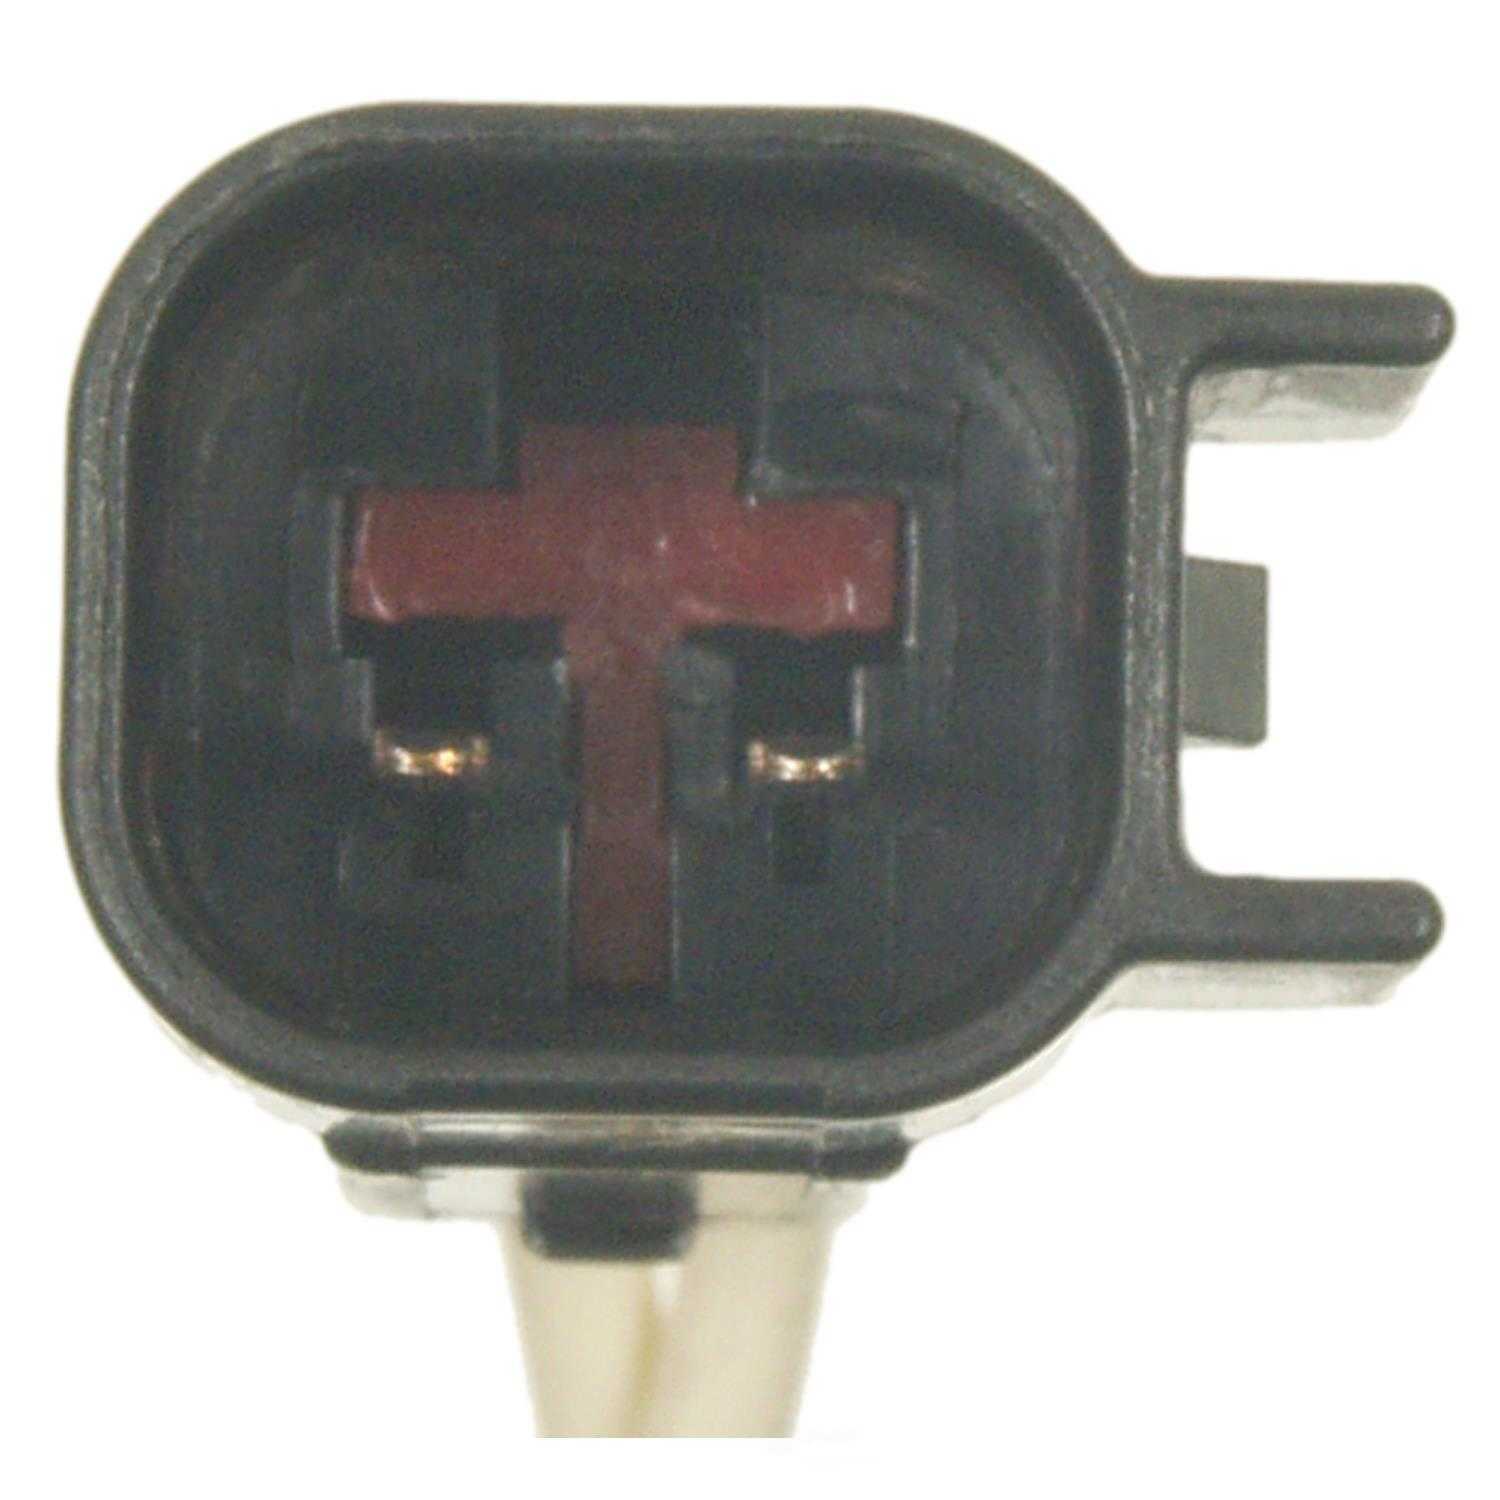 STANDARD MOTOR PRODUCTS - Power Take Off(PTO) Reduction Drive Gear Sensor Connector - STA S-1563